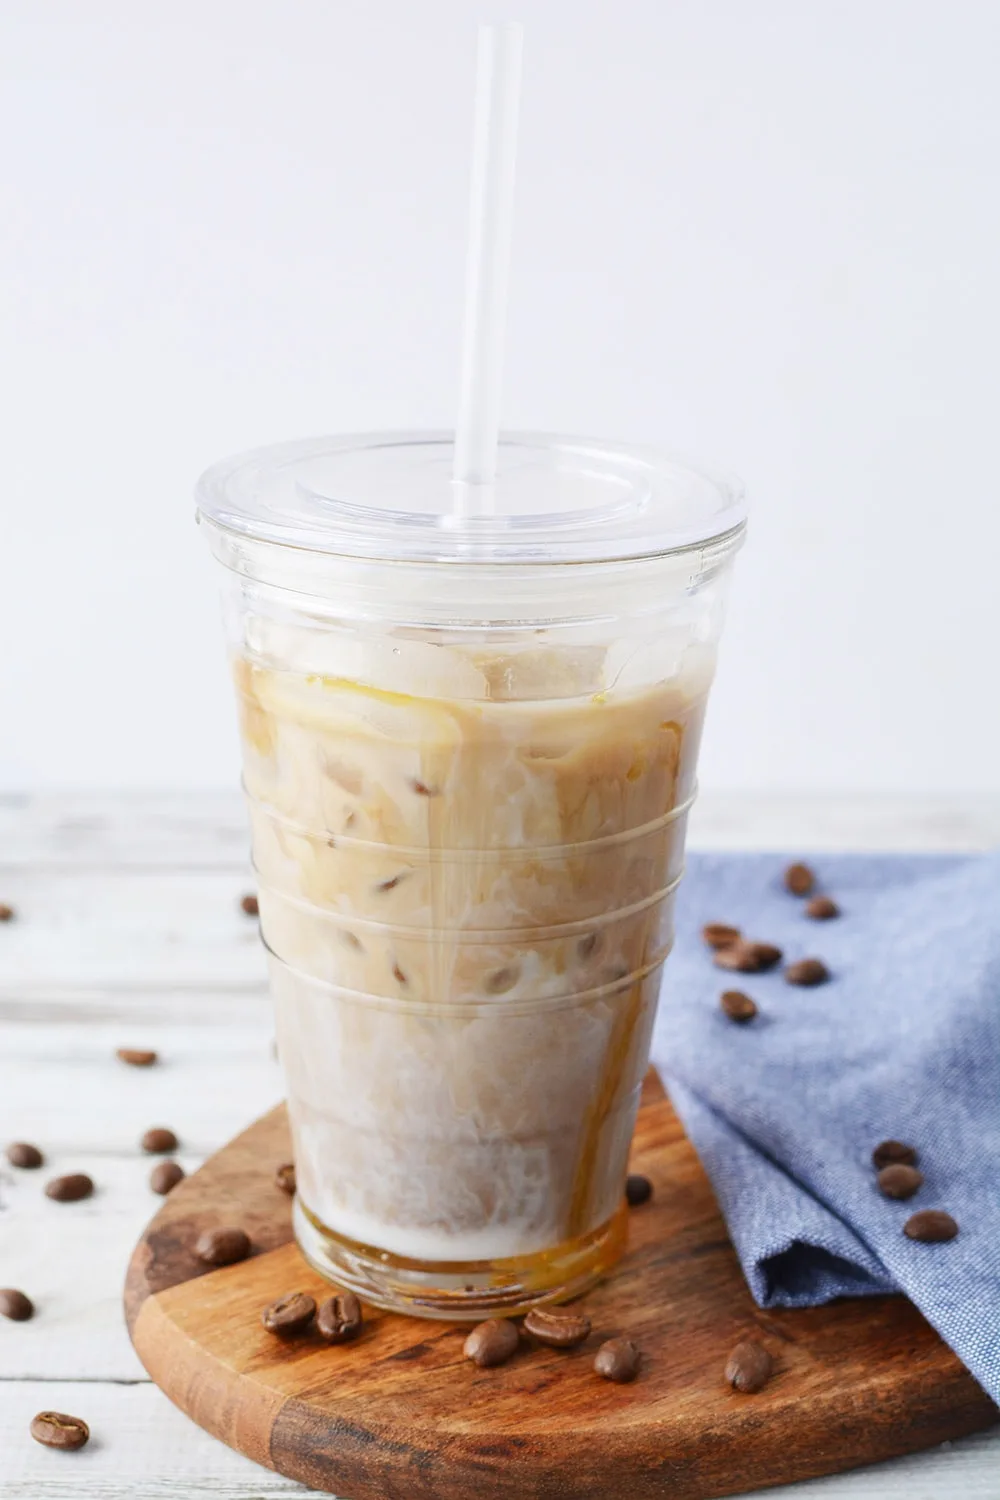 Iced coffee with caramel in a tumbler with straw.